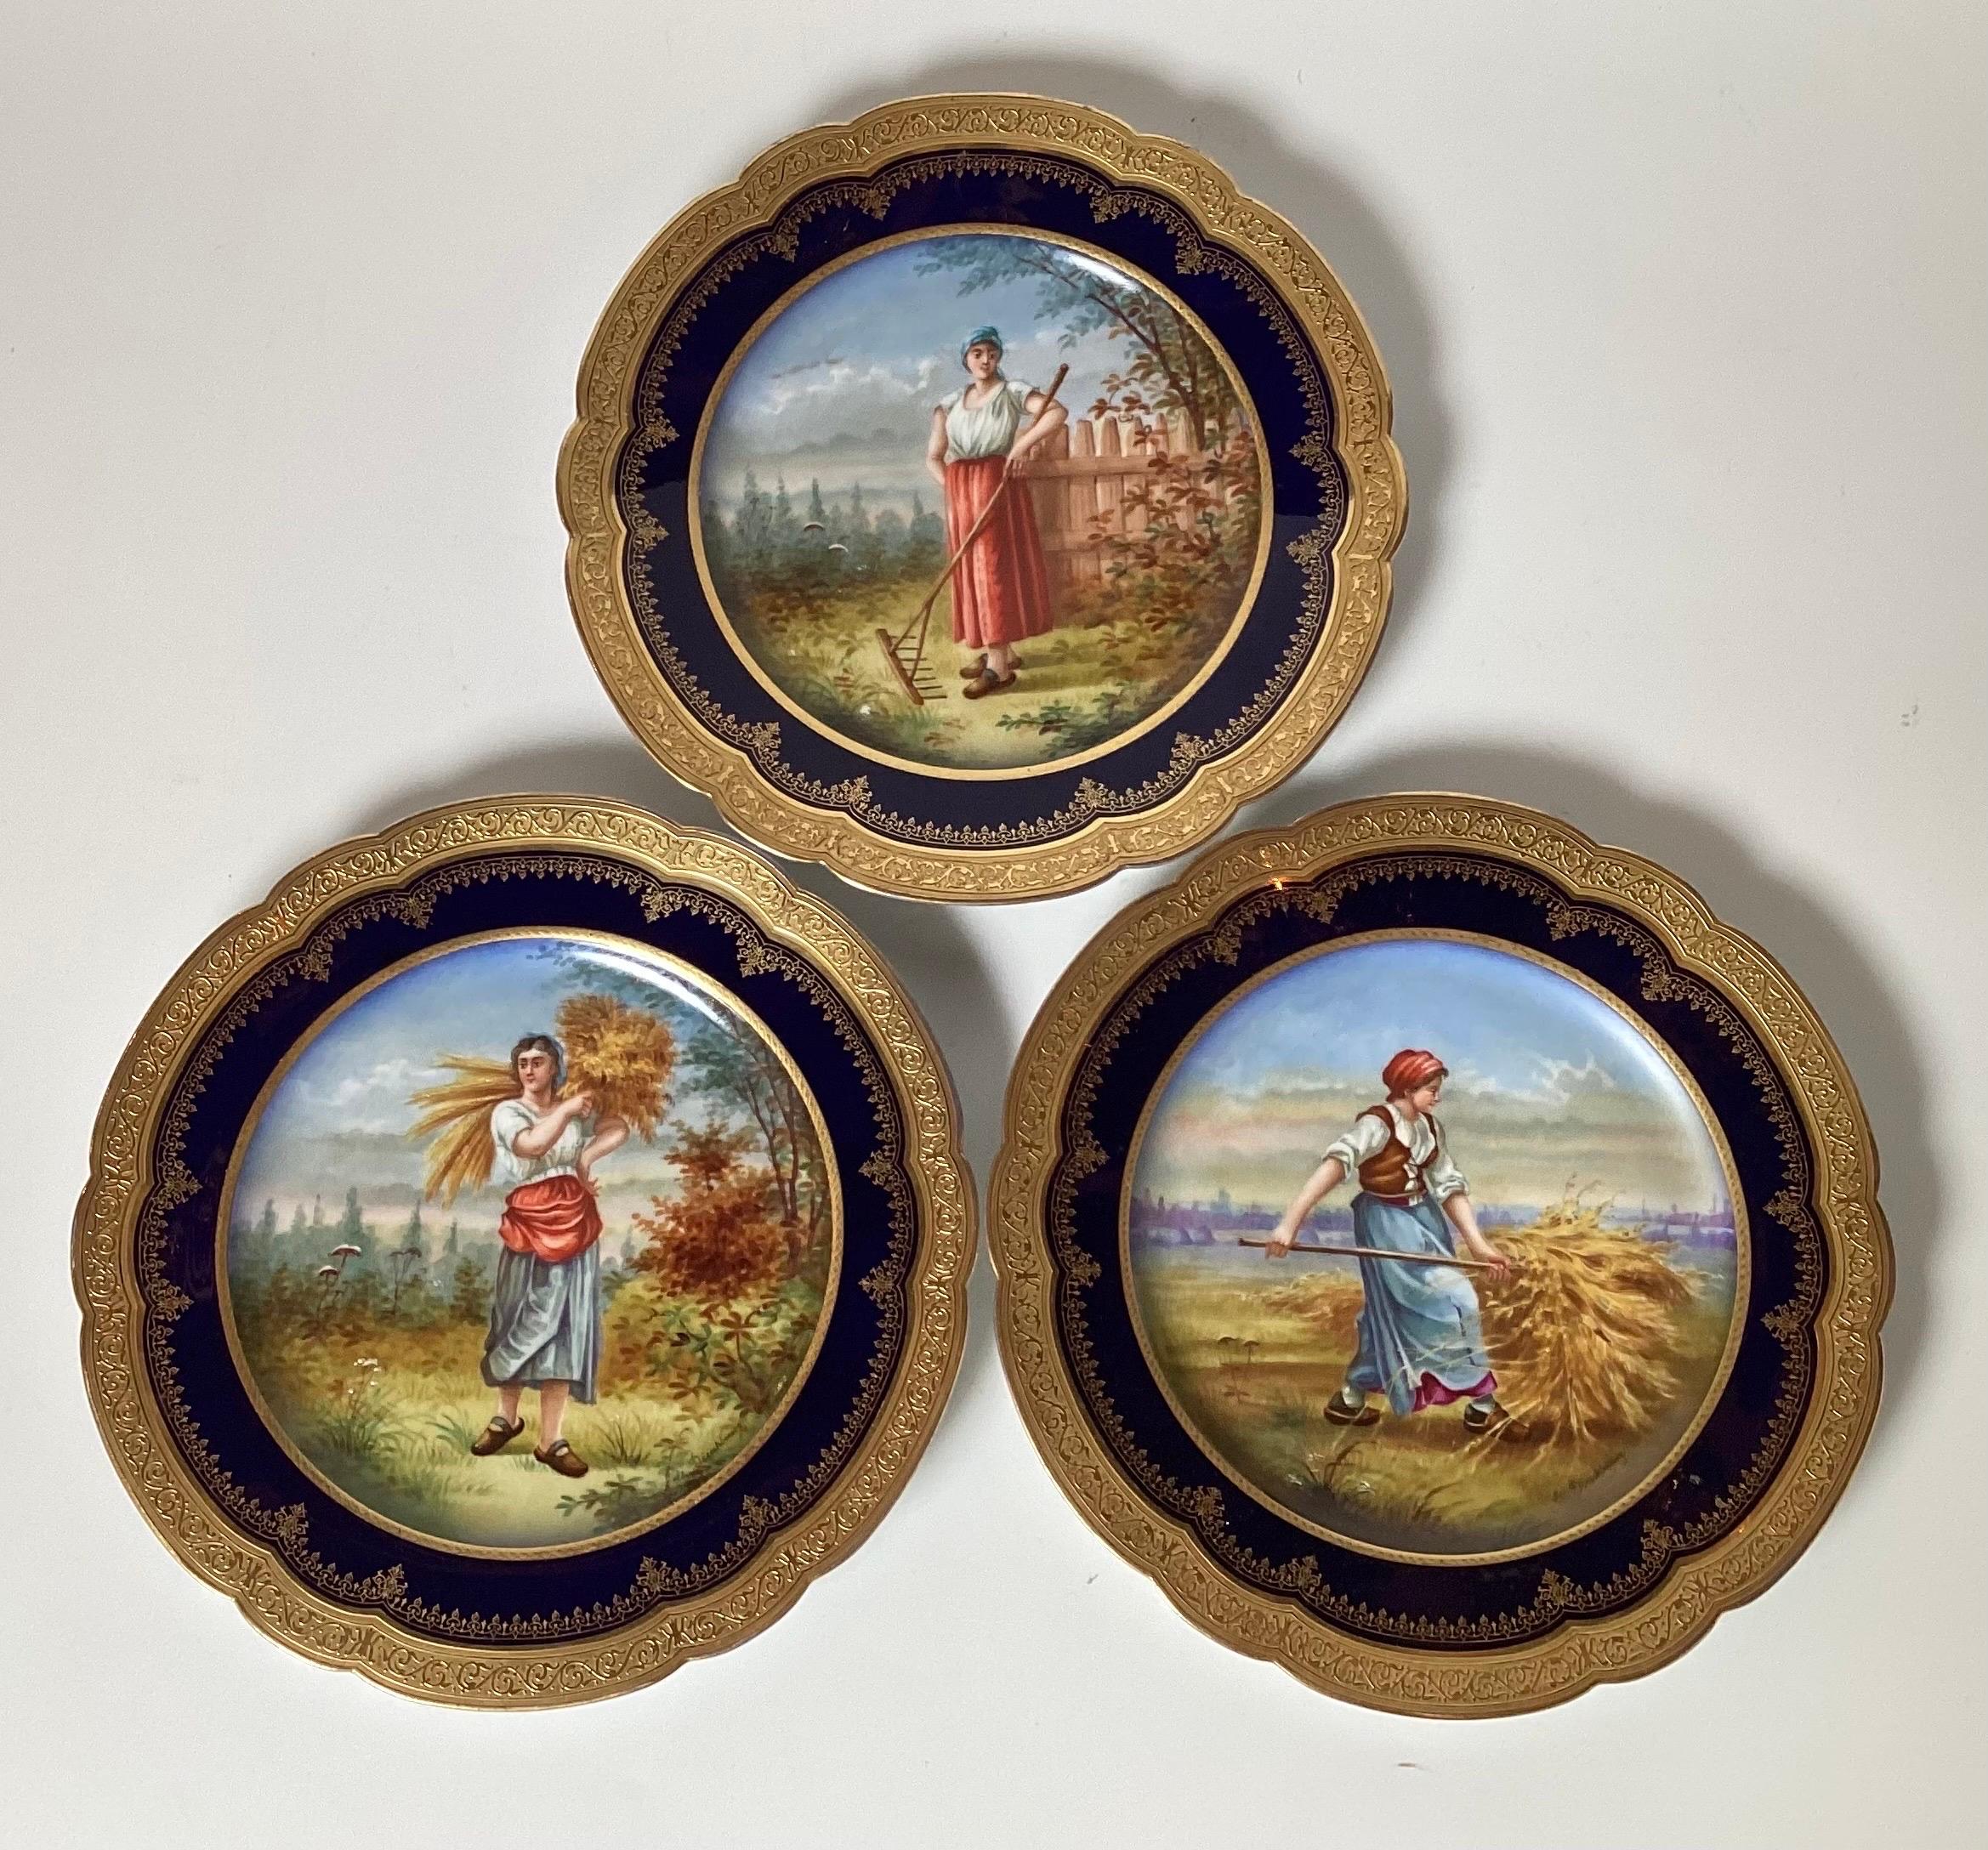 Three Sevres Gilt Heightened Porcelain Cabinet Plates, Mid 19th Century. With scalloped edges, gilt heightened and cobalt border, each with female farmers to the center and signed 'Ch. Dieschbourg' lower right. Crowned 'LP' monogram mark and 1844